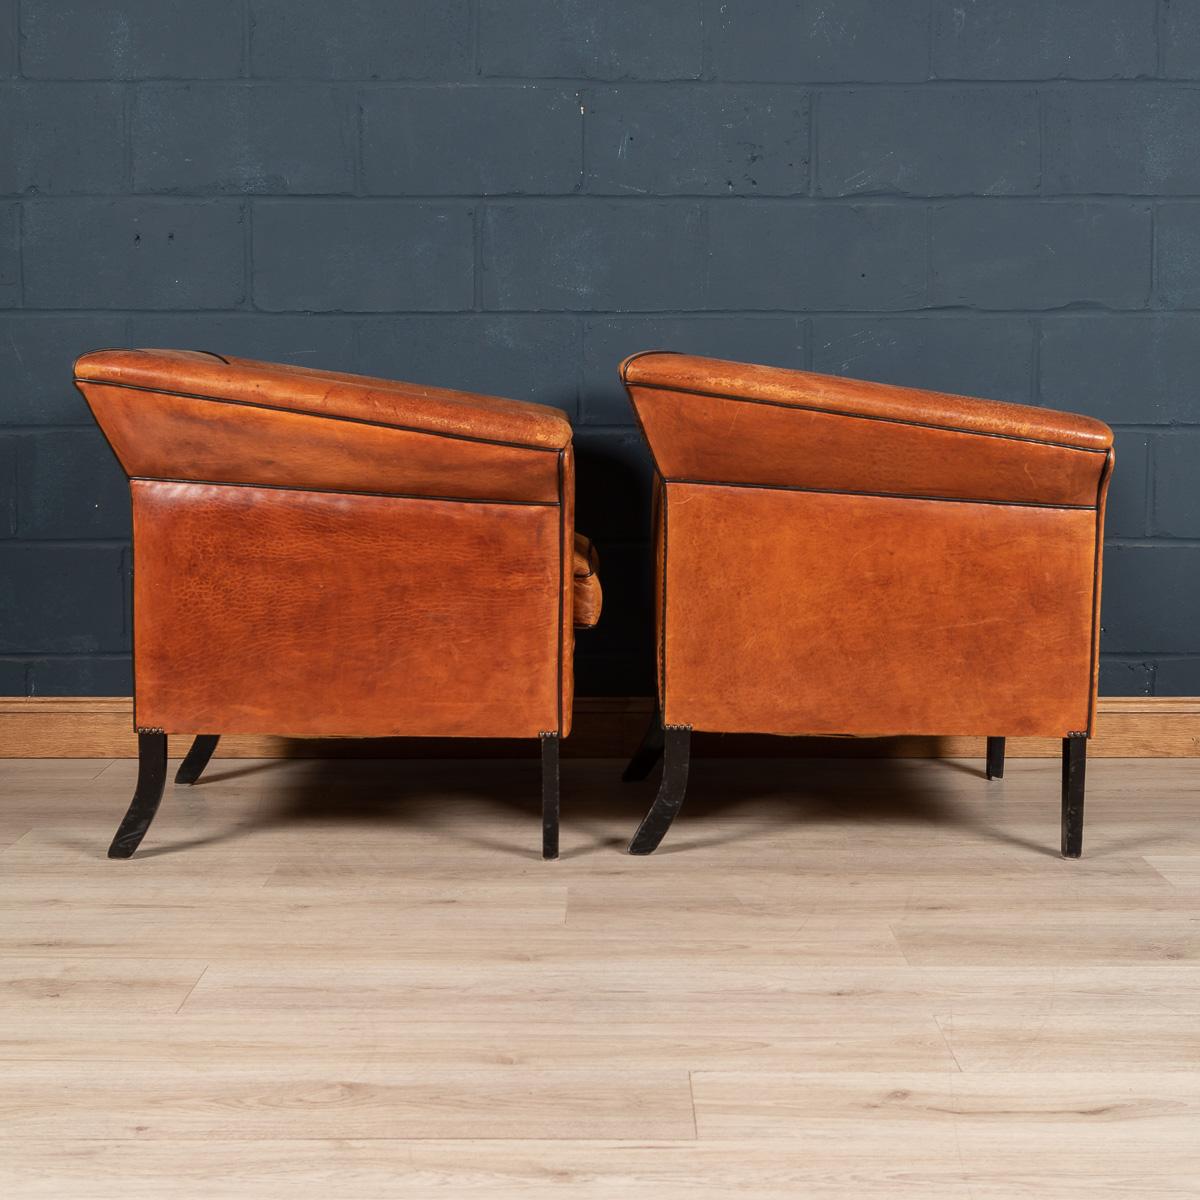 20th Century Pair of of Art Deco Style Dutch Sheepskin Leather Club Chairs 1